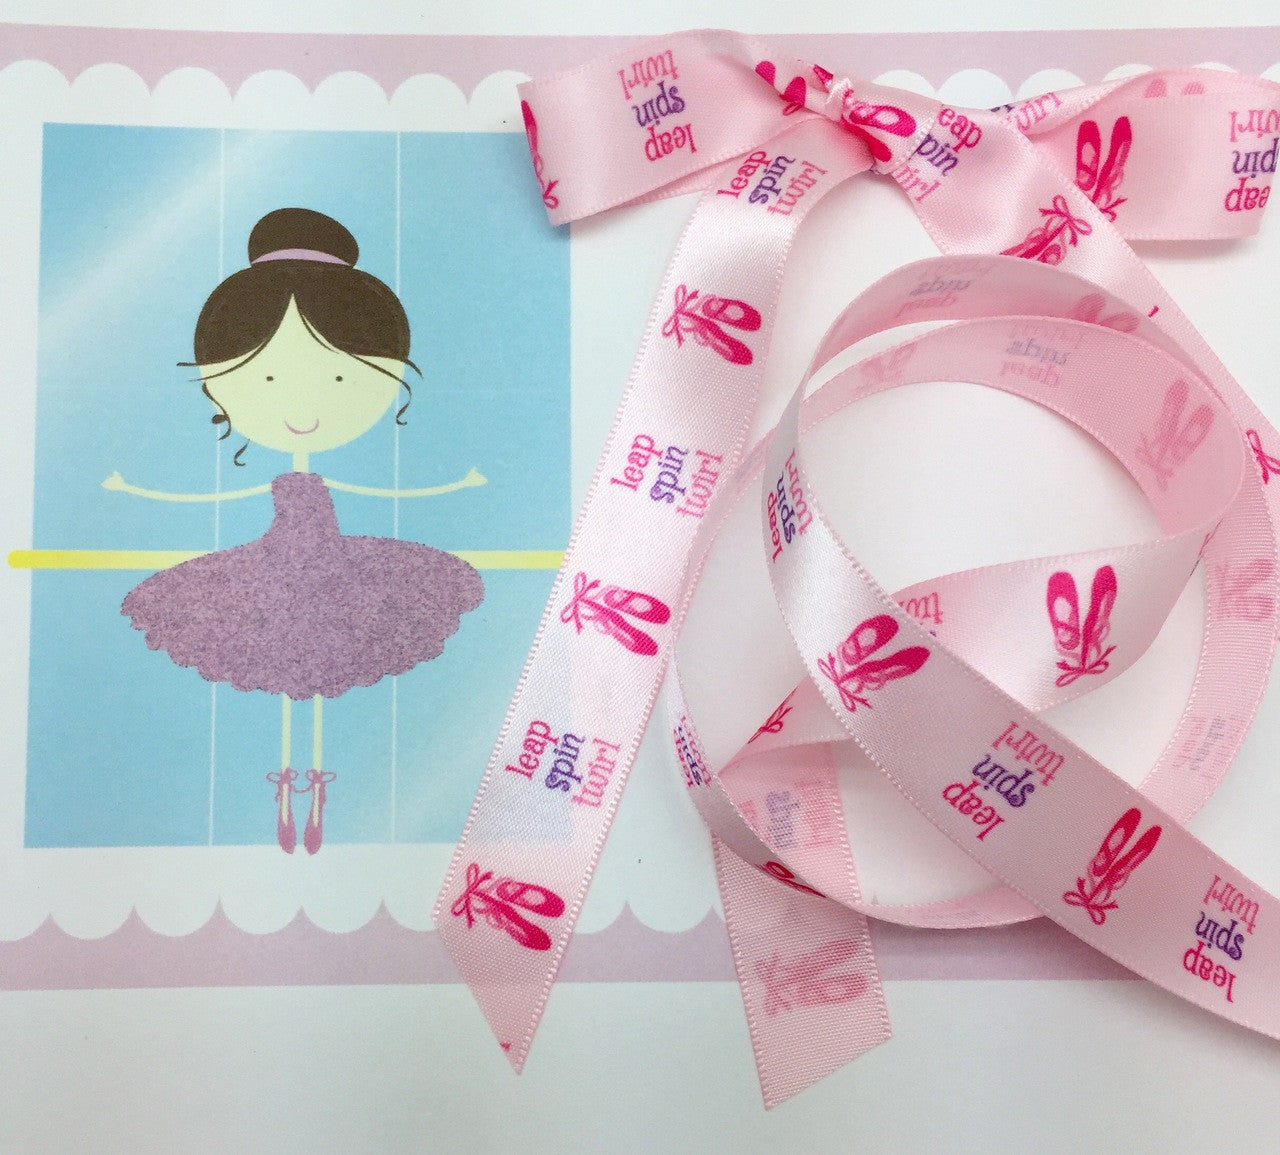 Working on a a Ballet themed party? Adding our ballet ribbon to the invitation will make them twirl!